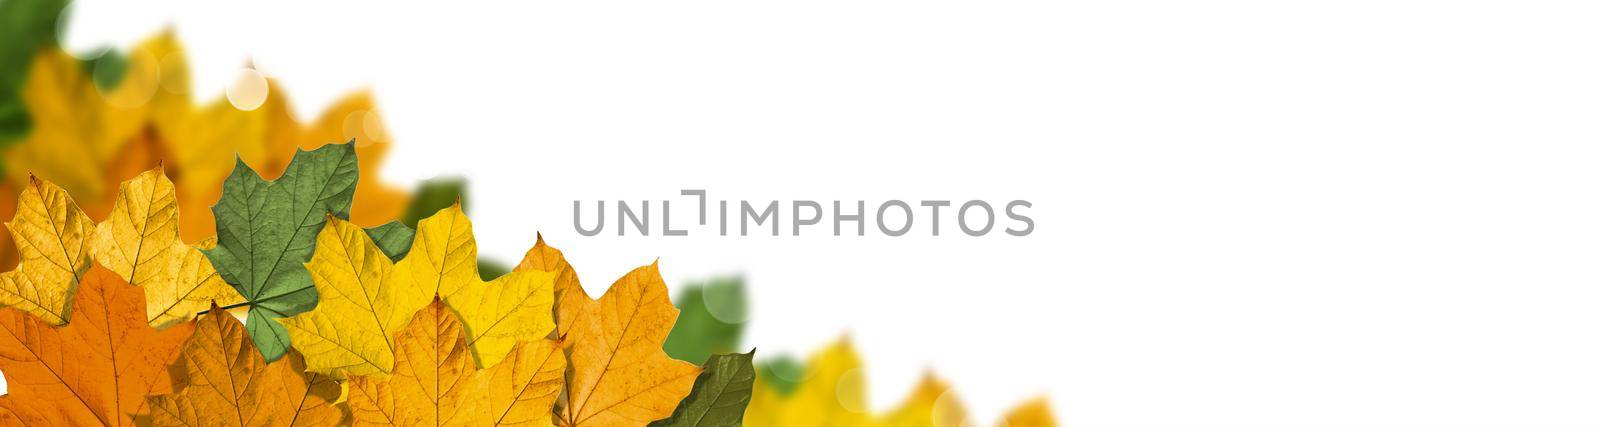 Colorful bright leaves isolated on white background in a frame by Taut